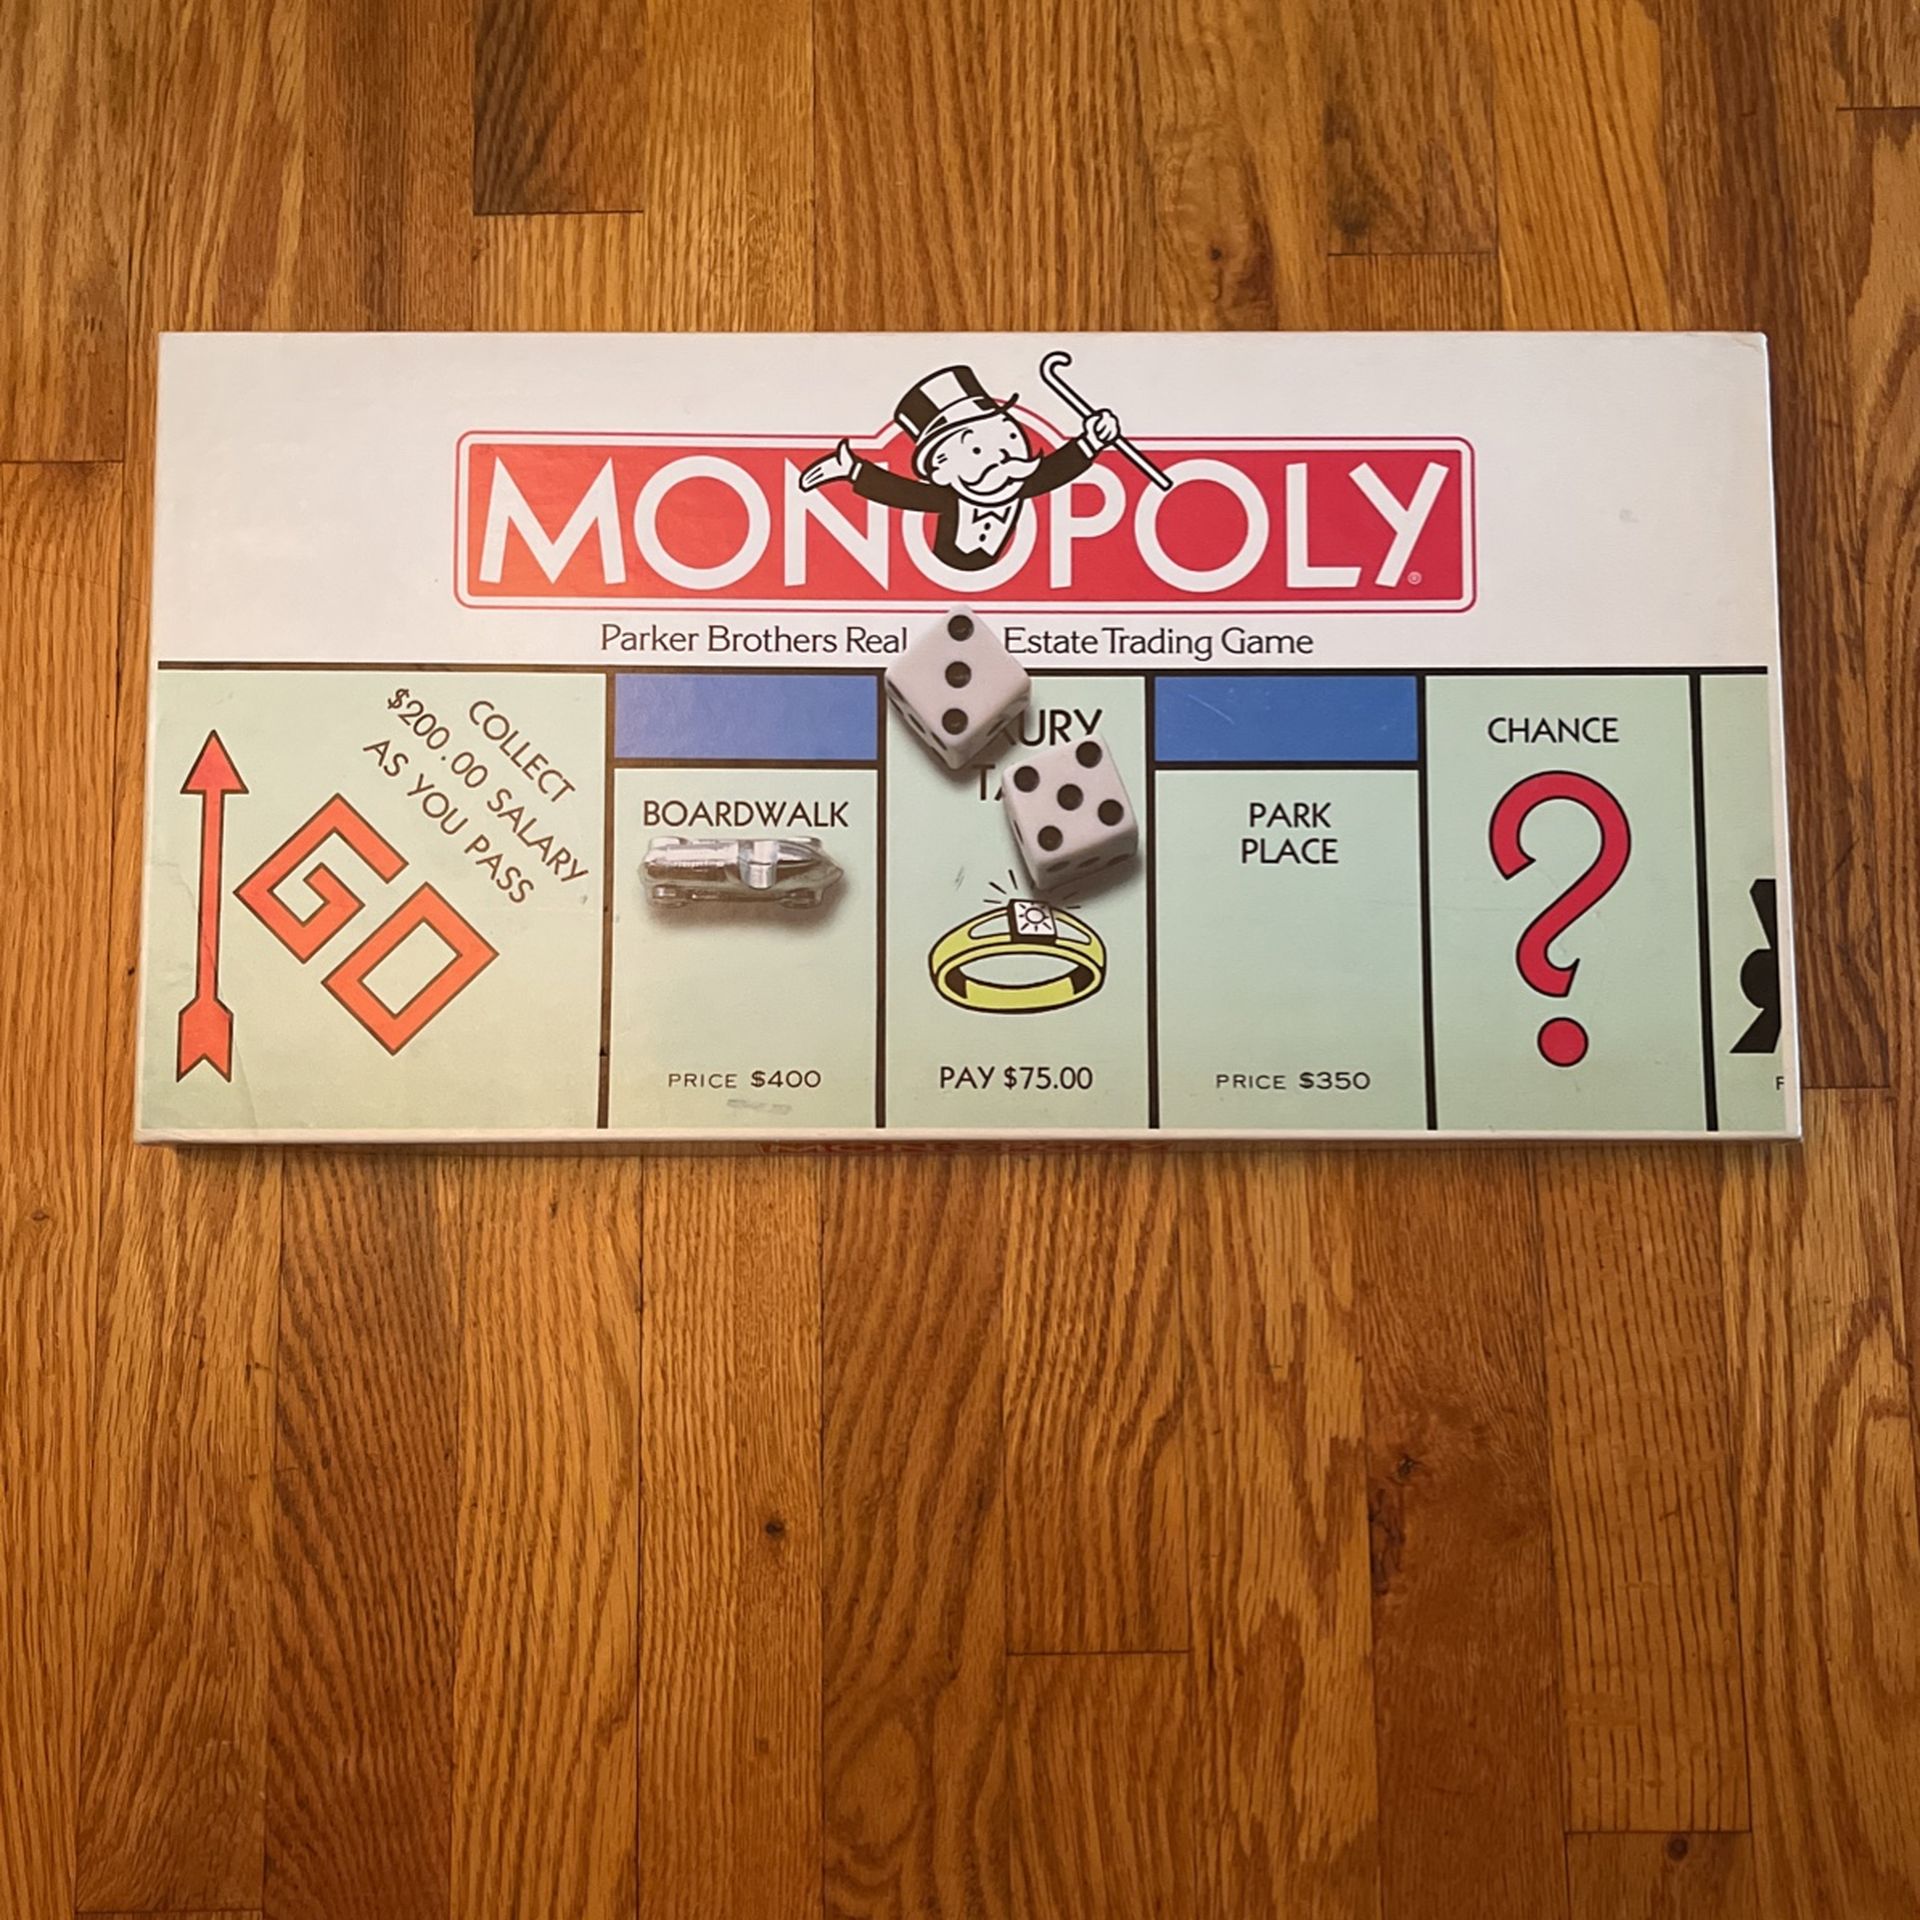 Vintage Monopoly With Sealed Contents